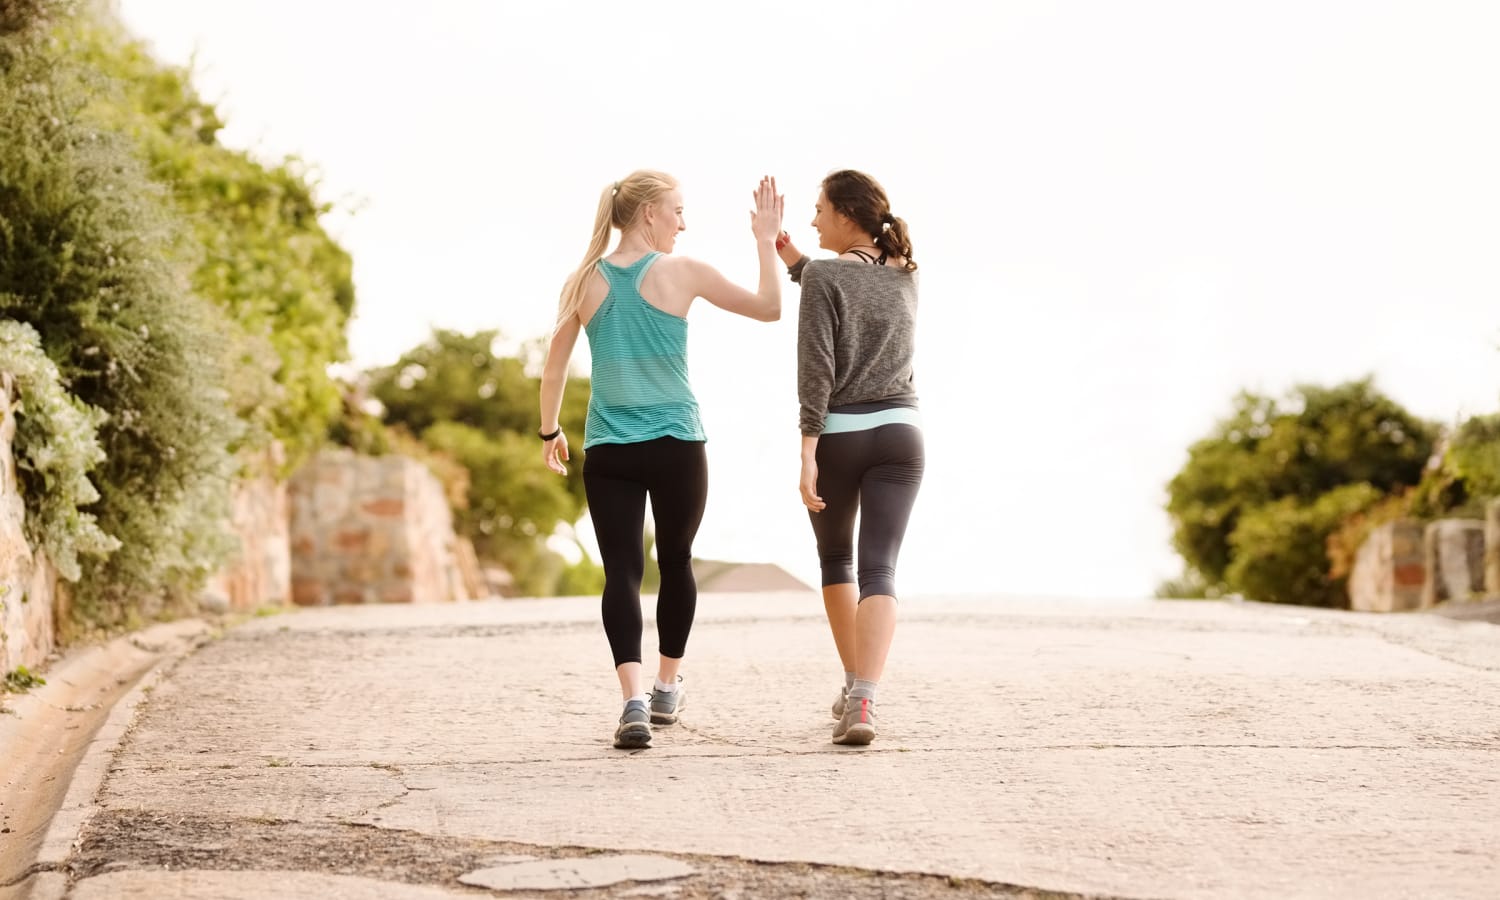 Does Walking Help You Lose Weight?